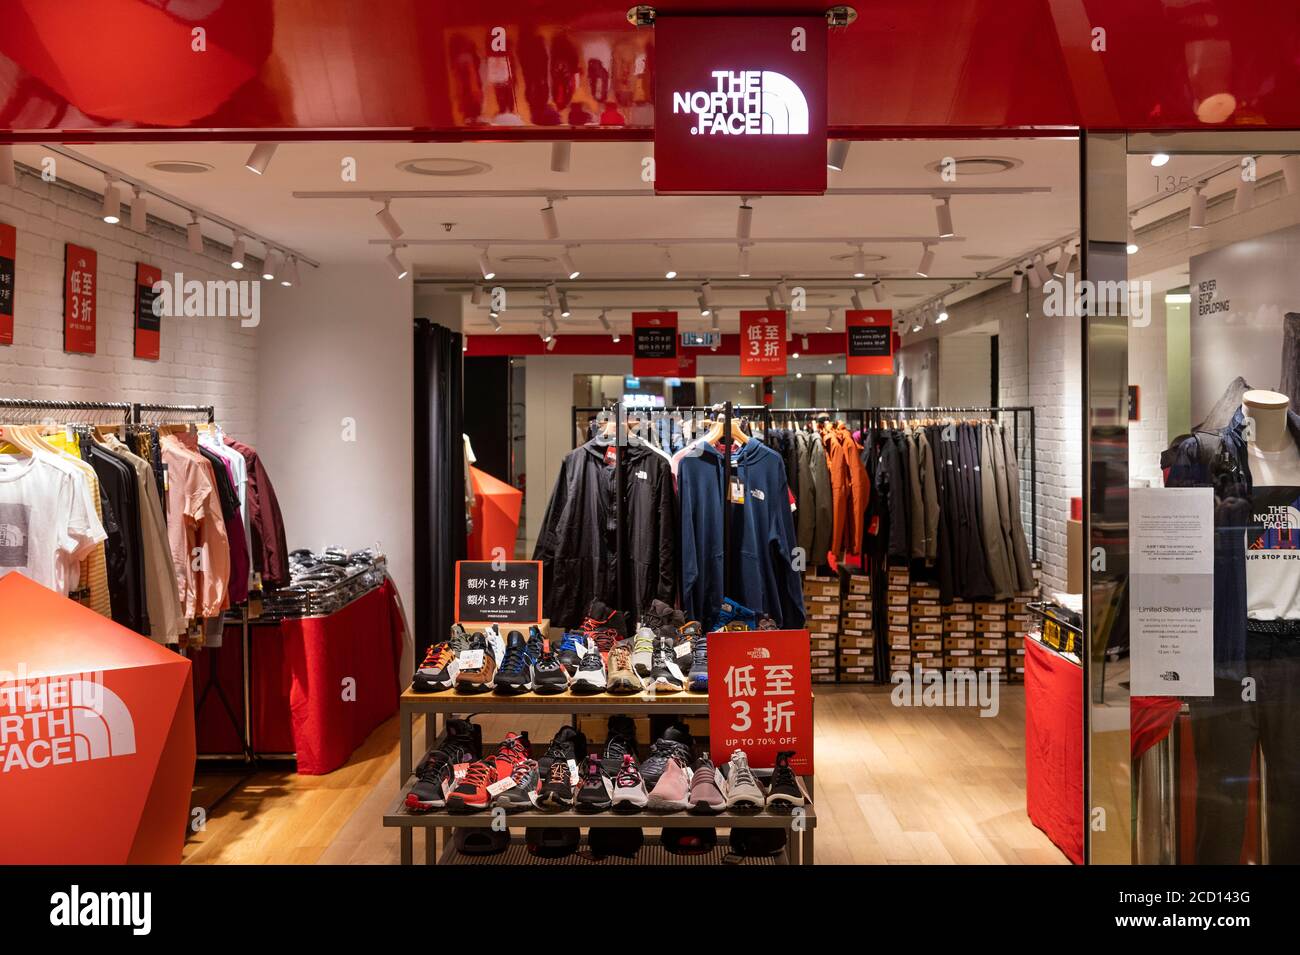 American outdoor clothing brand The North Face store seen in Hong Kong  Stock Photo - Alamy